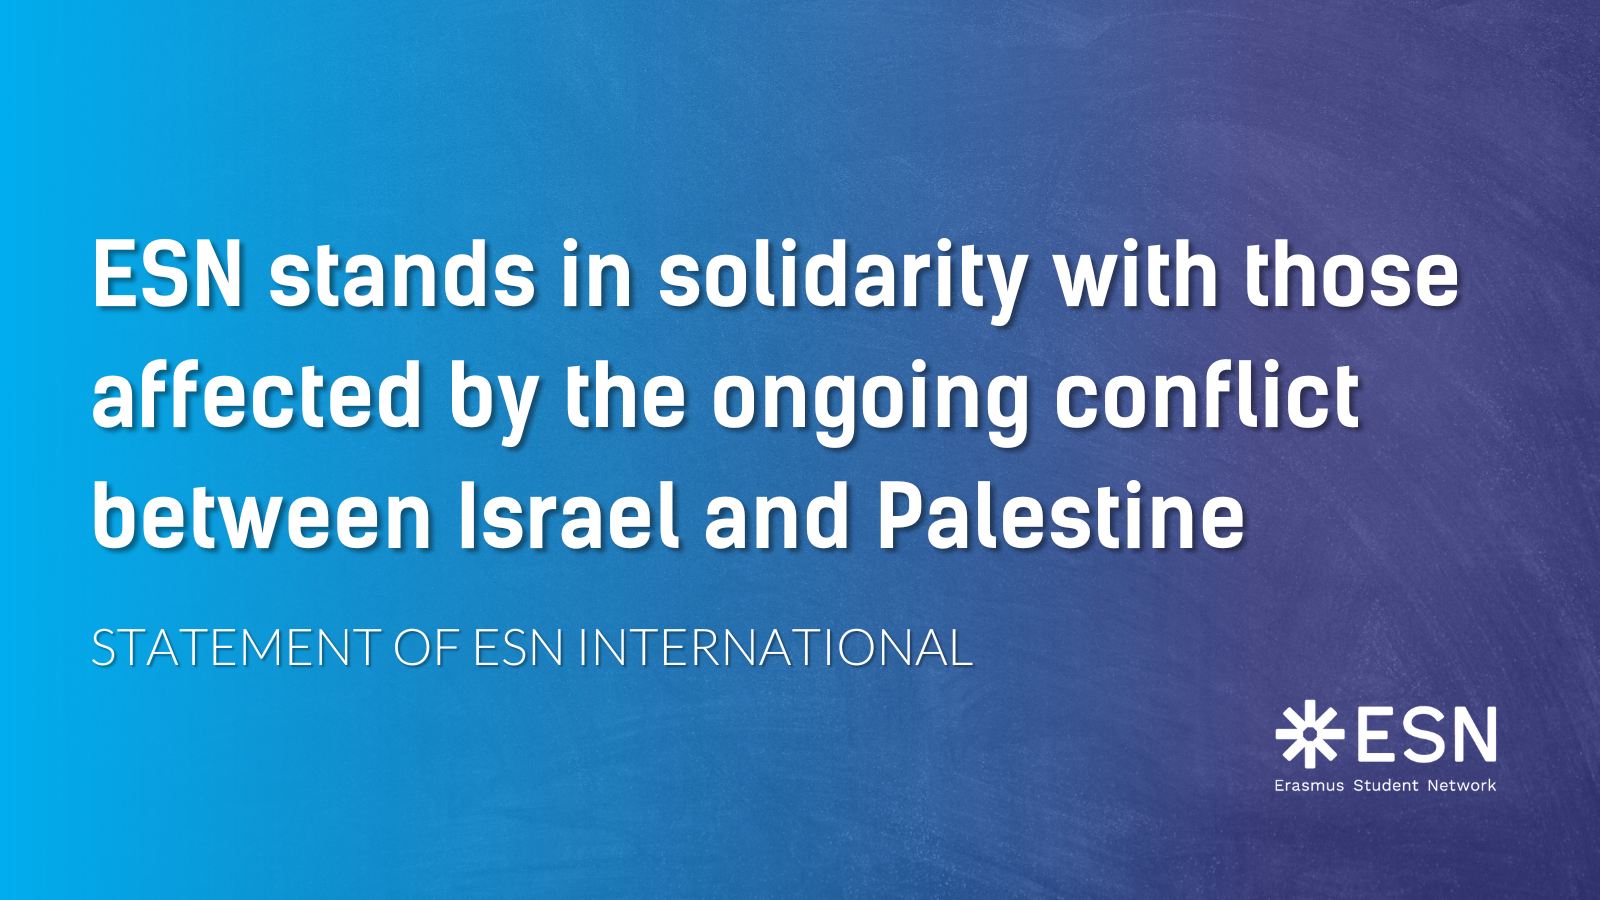 ESN stands in solidarity with those affected by the ongoing conflict between Israel and Palestine. Statement of ESN International.